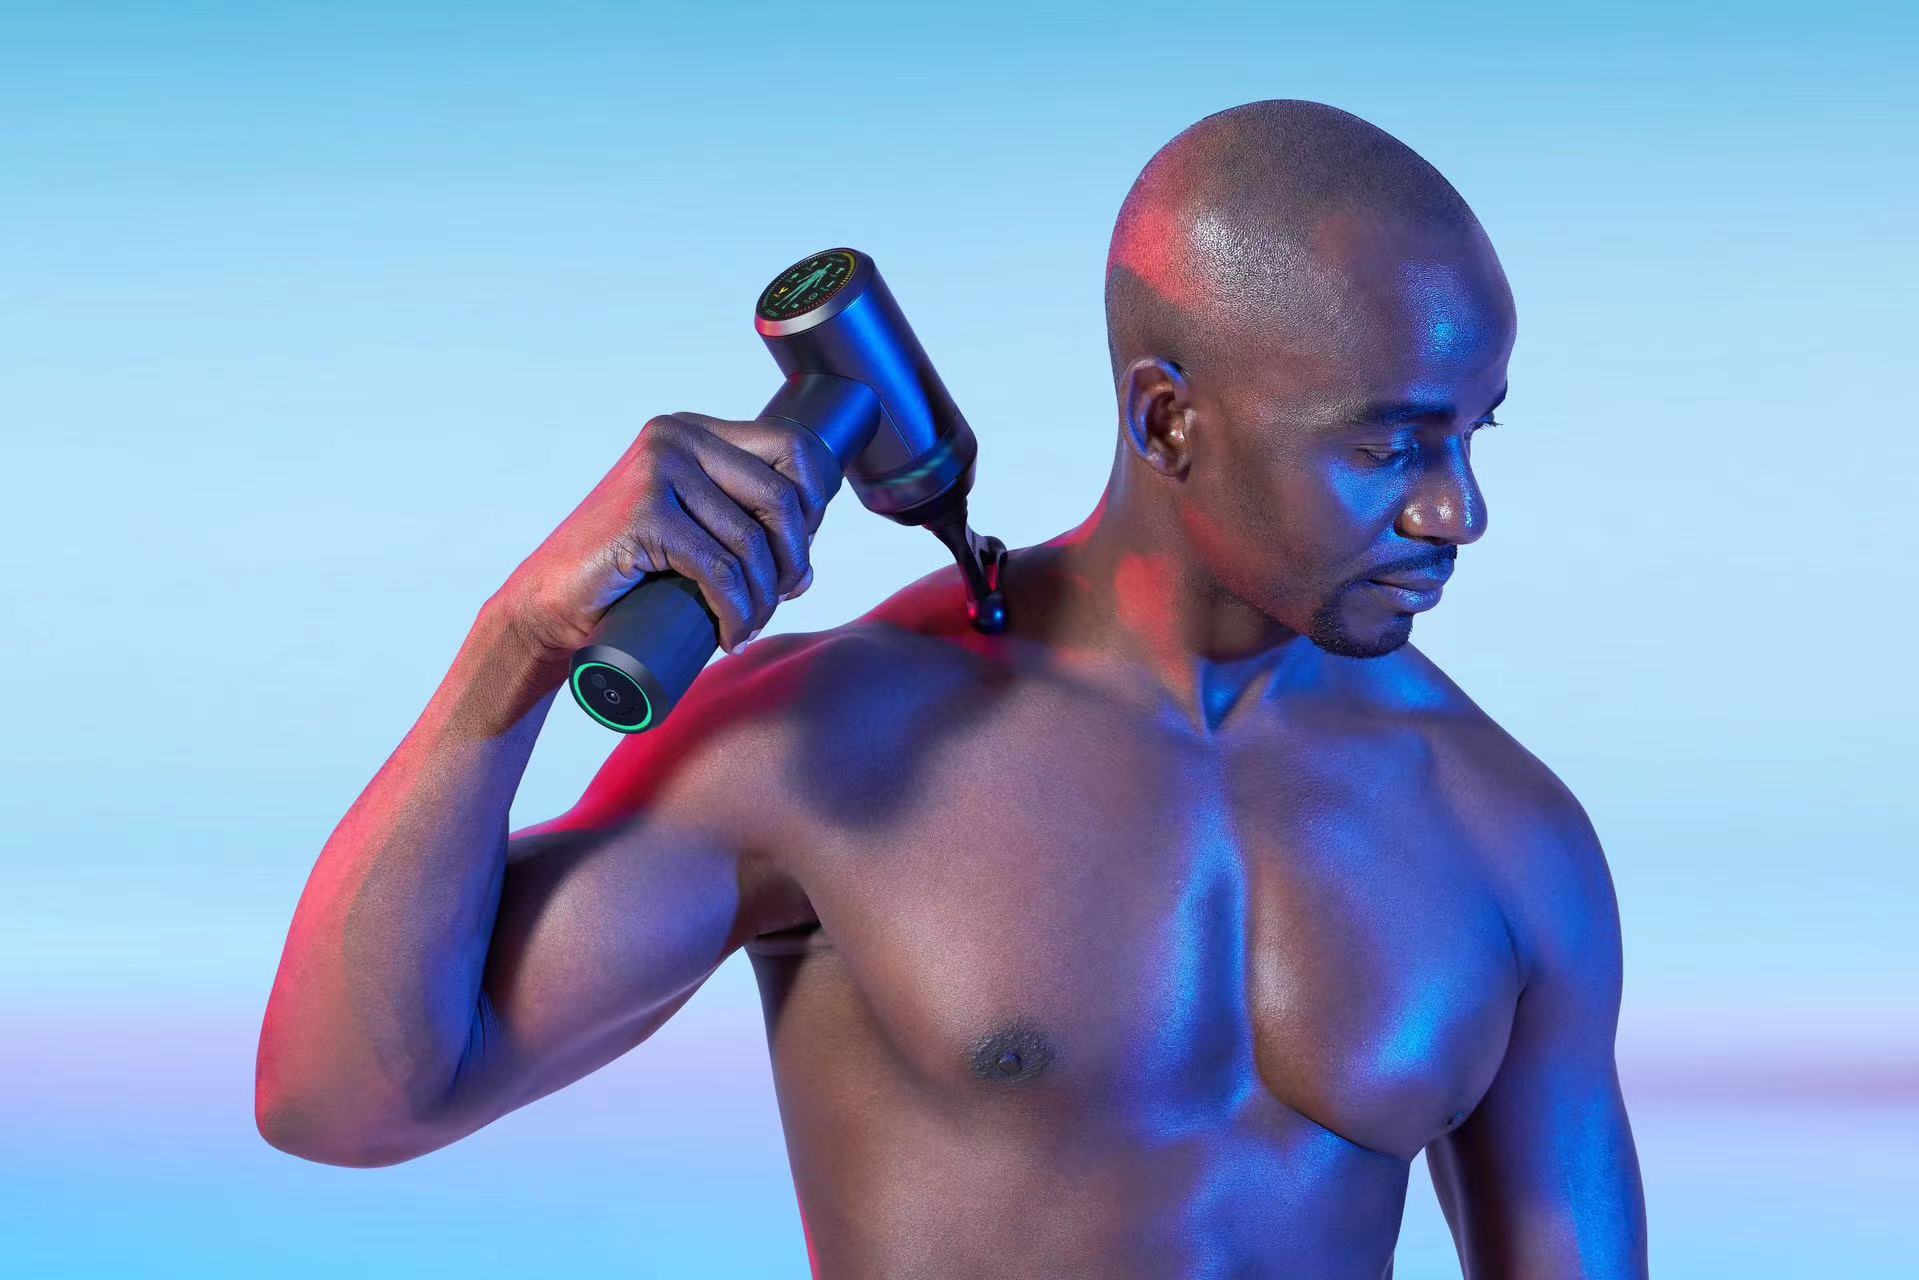 How to Use a Massage Gun for Myofascial Release